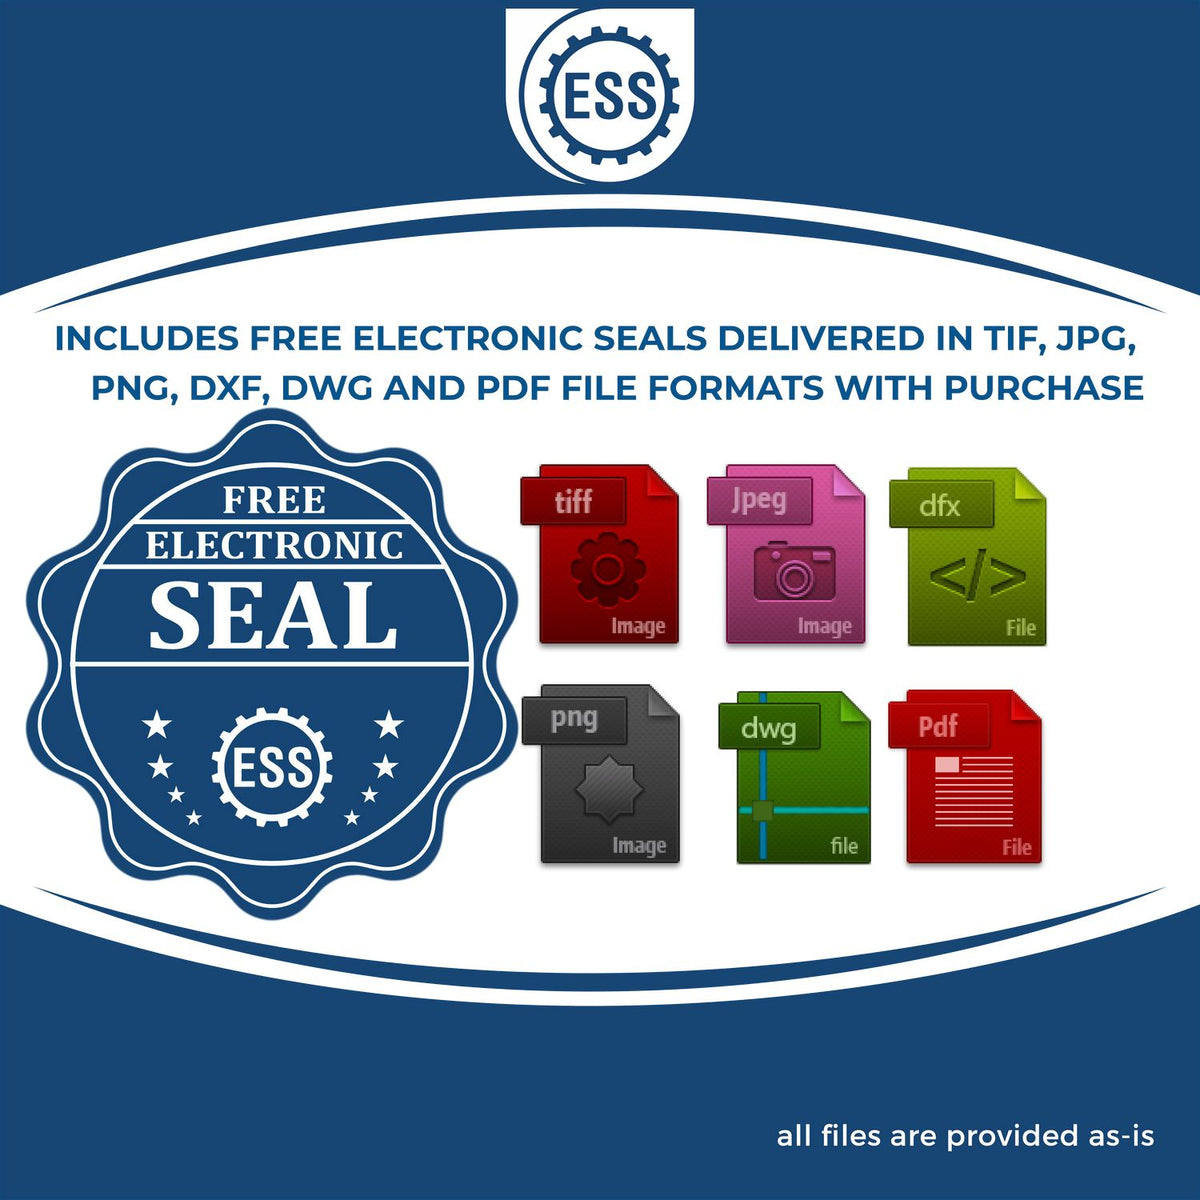 An infographic for the free electronic seal for the State of Massachusetts Extended Long Reach Engineer Seal illustrating the different file type icons such as DXF, DWG, TIF, JPG and PNG.